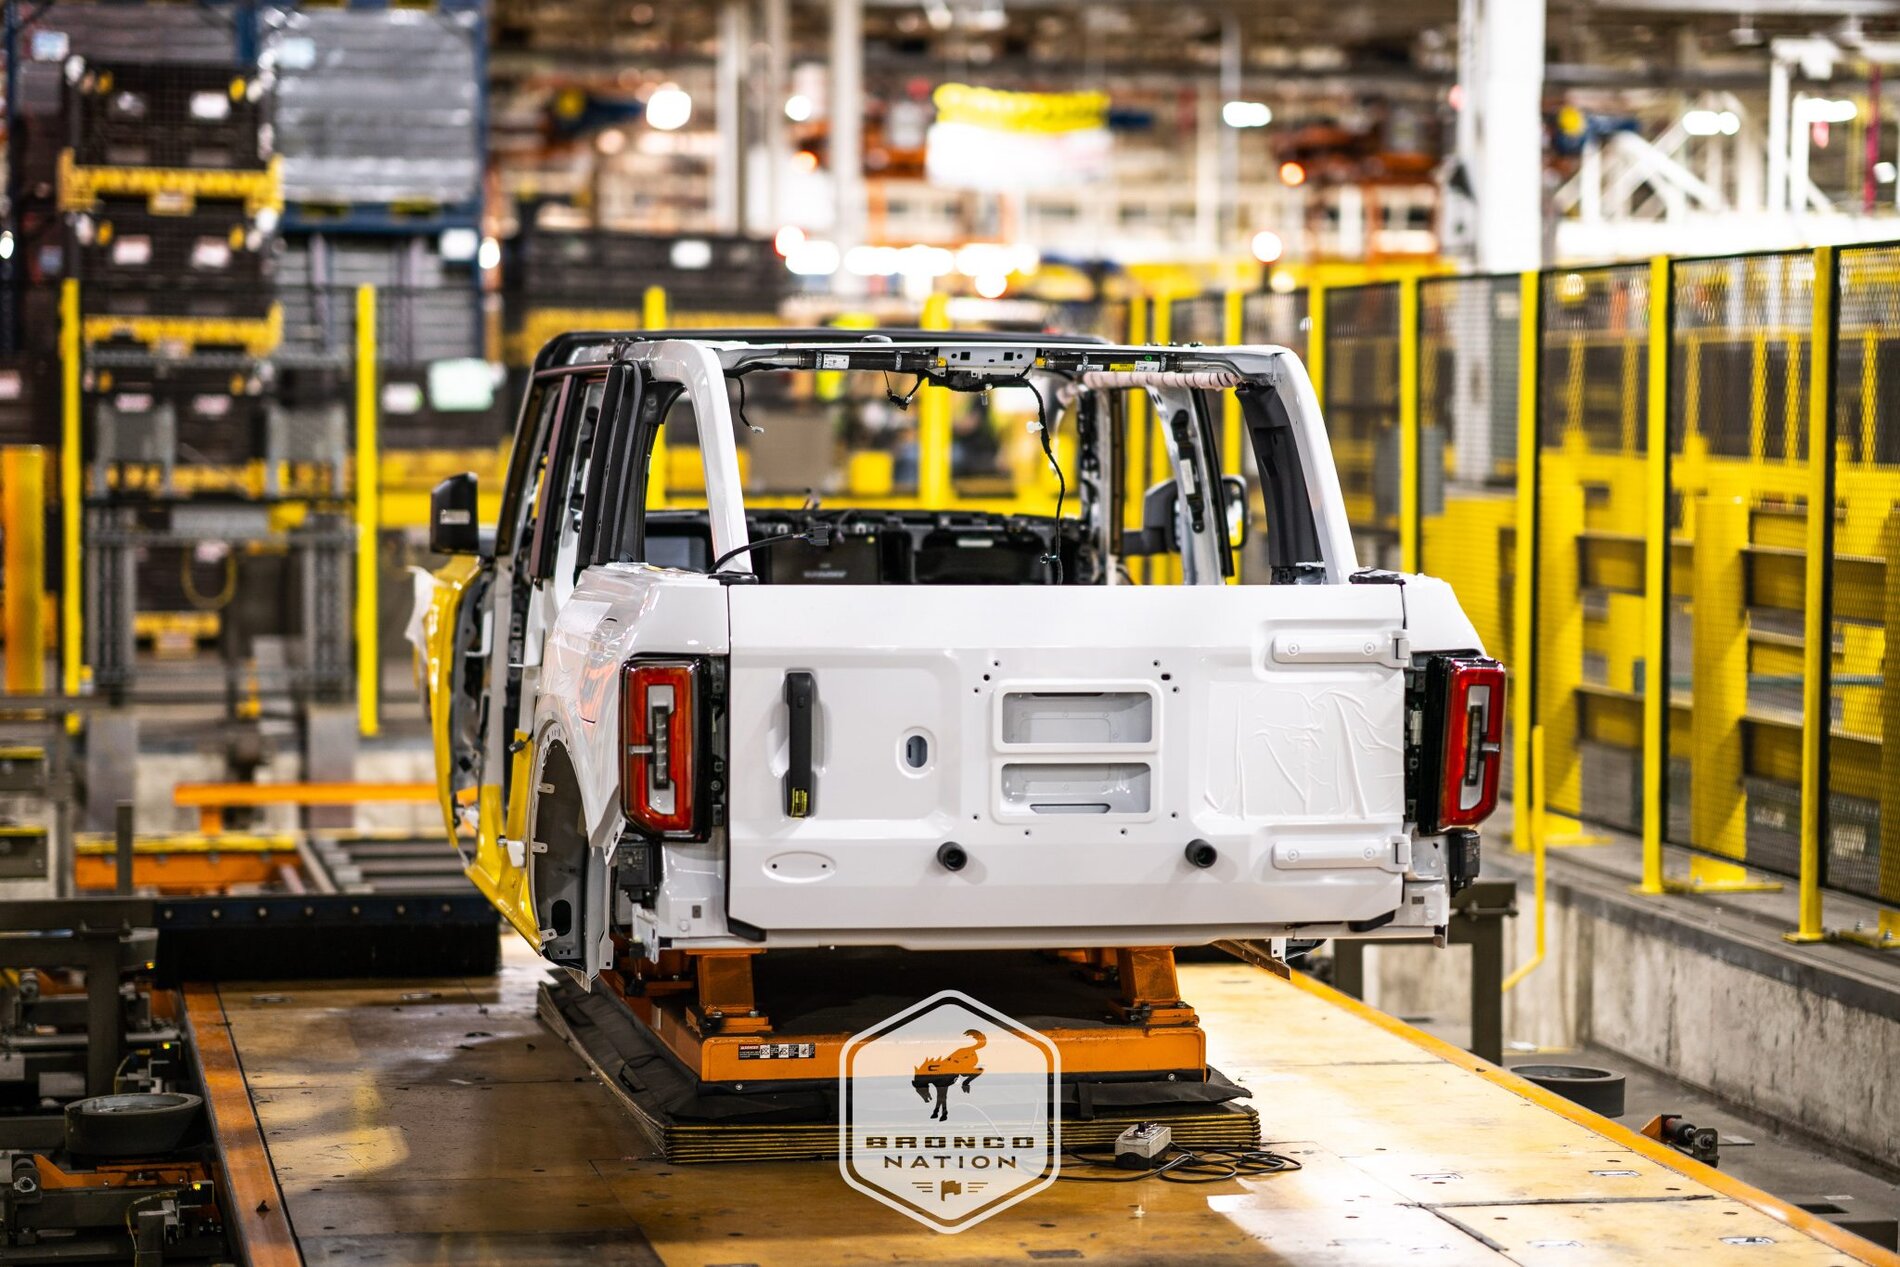 Ford Bronco Photos of pre-production Broncos on the assembly line. 2021 Bronco assembly line plant 2